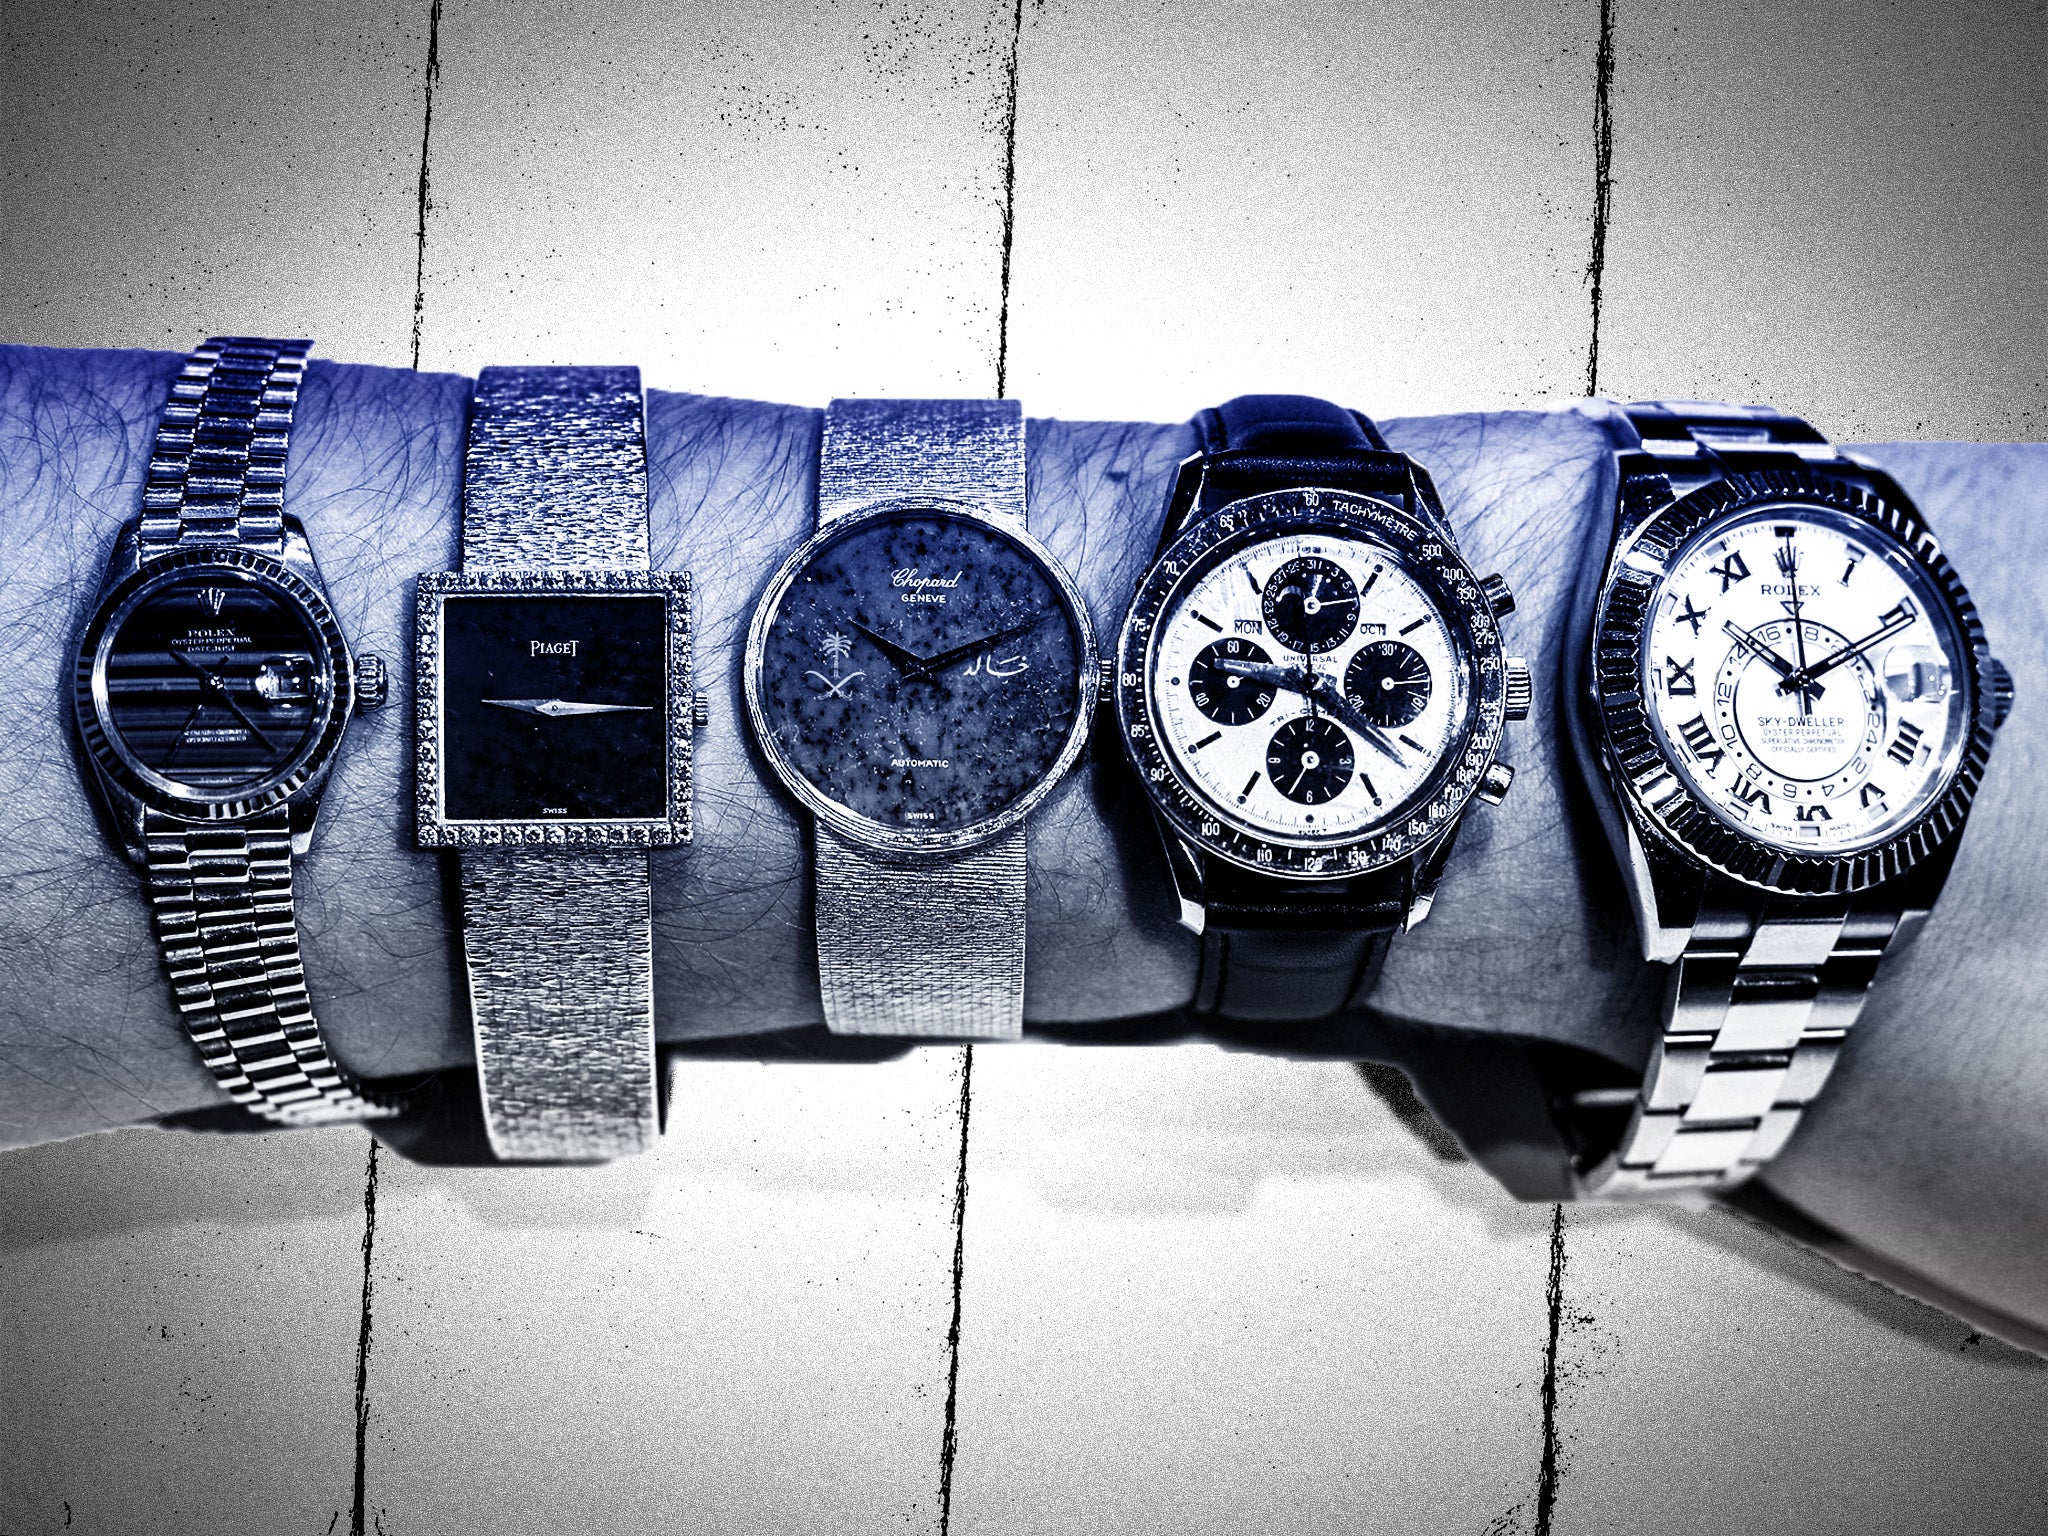 Rolex Rippers are using more violence with stolen watches safer and more  lucrative to... - LBC